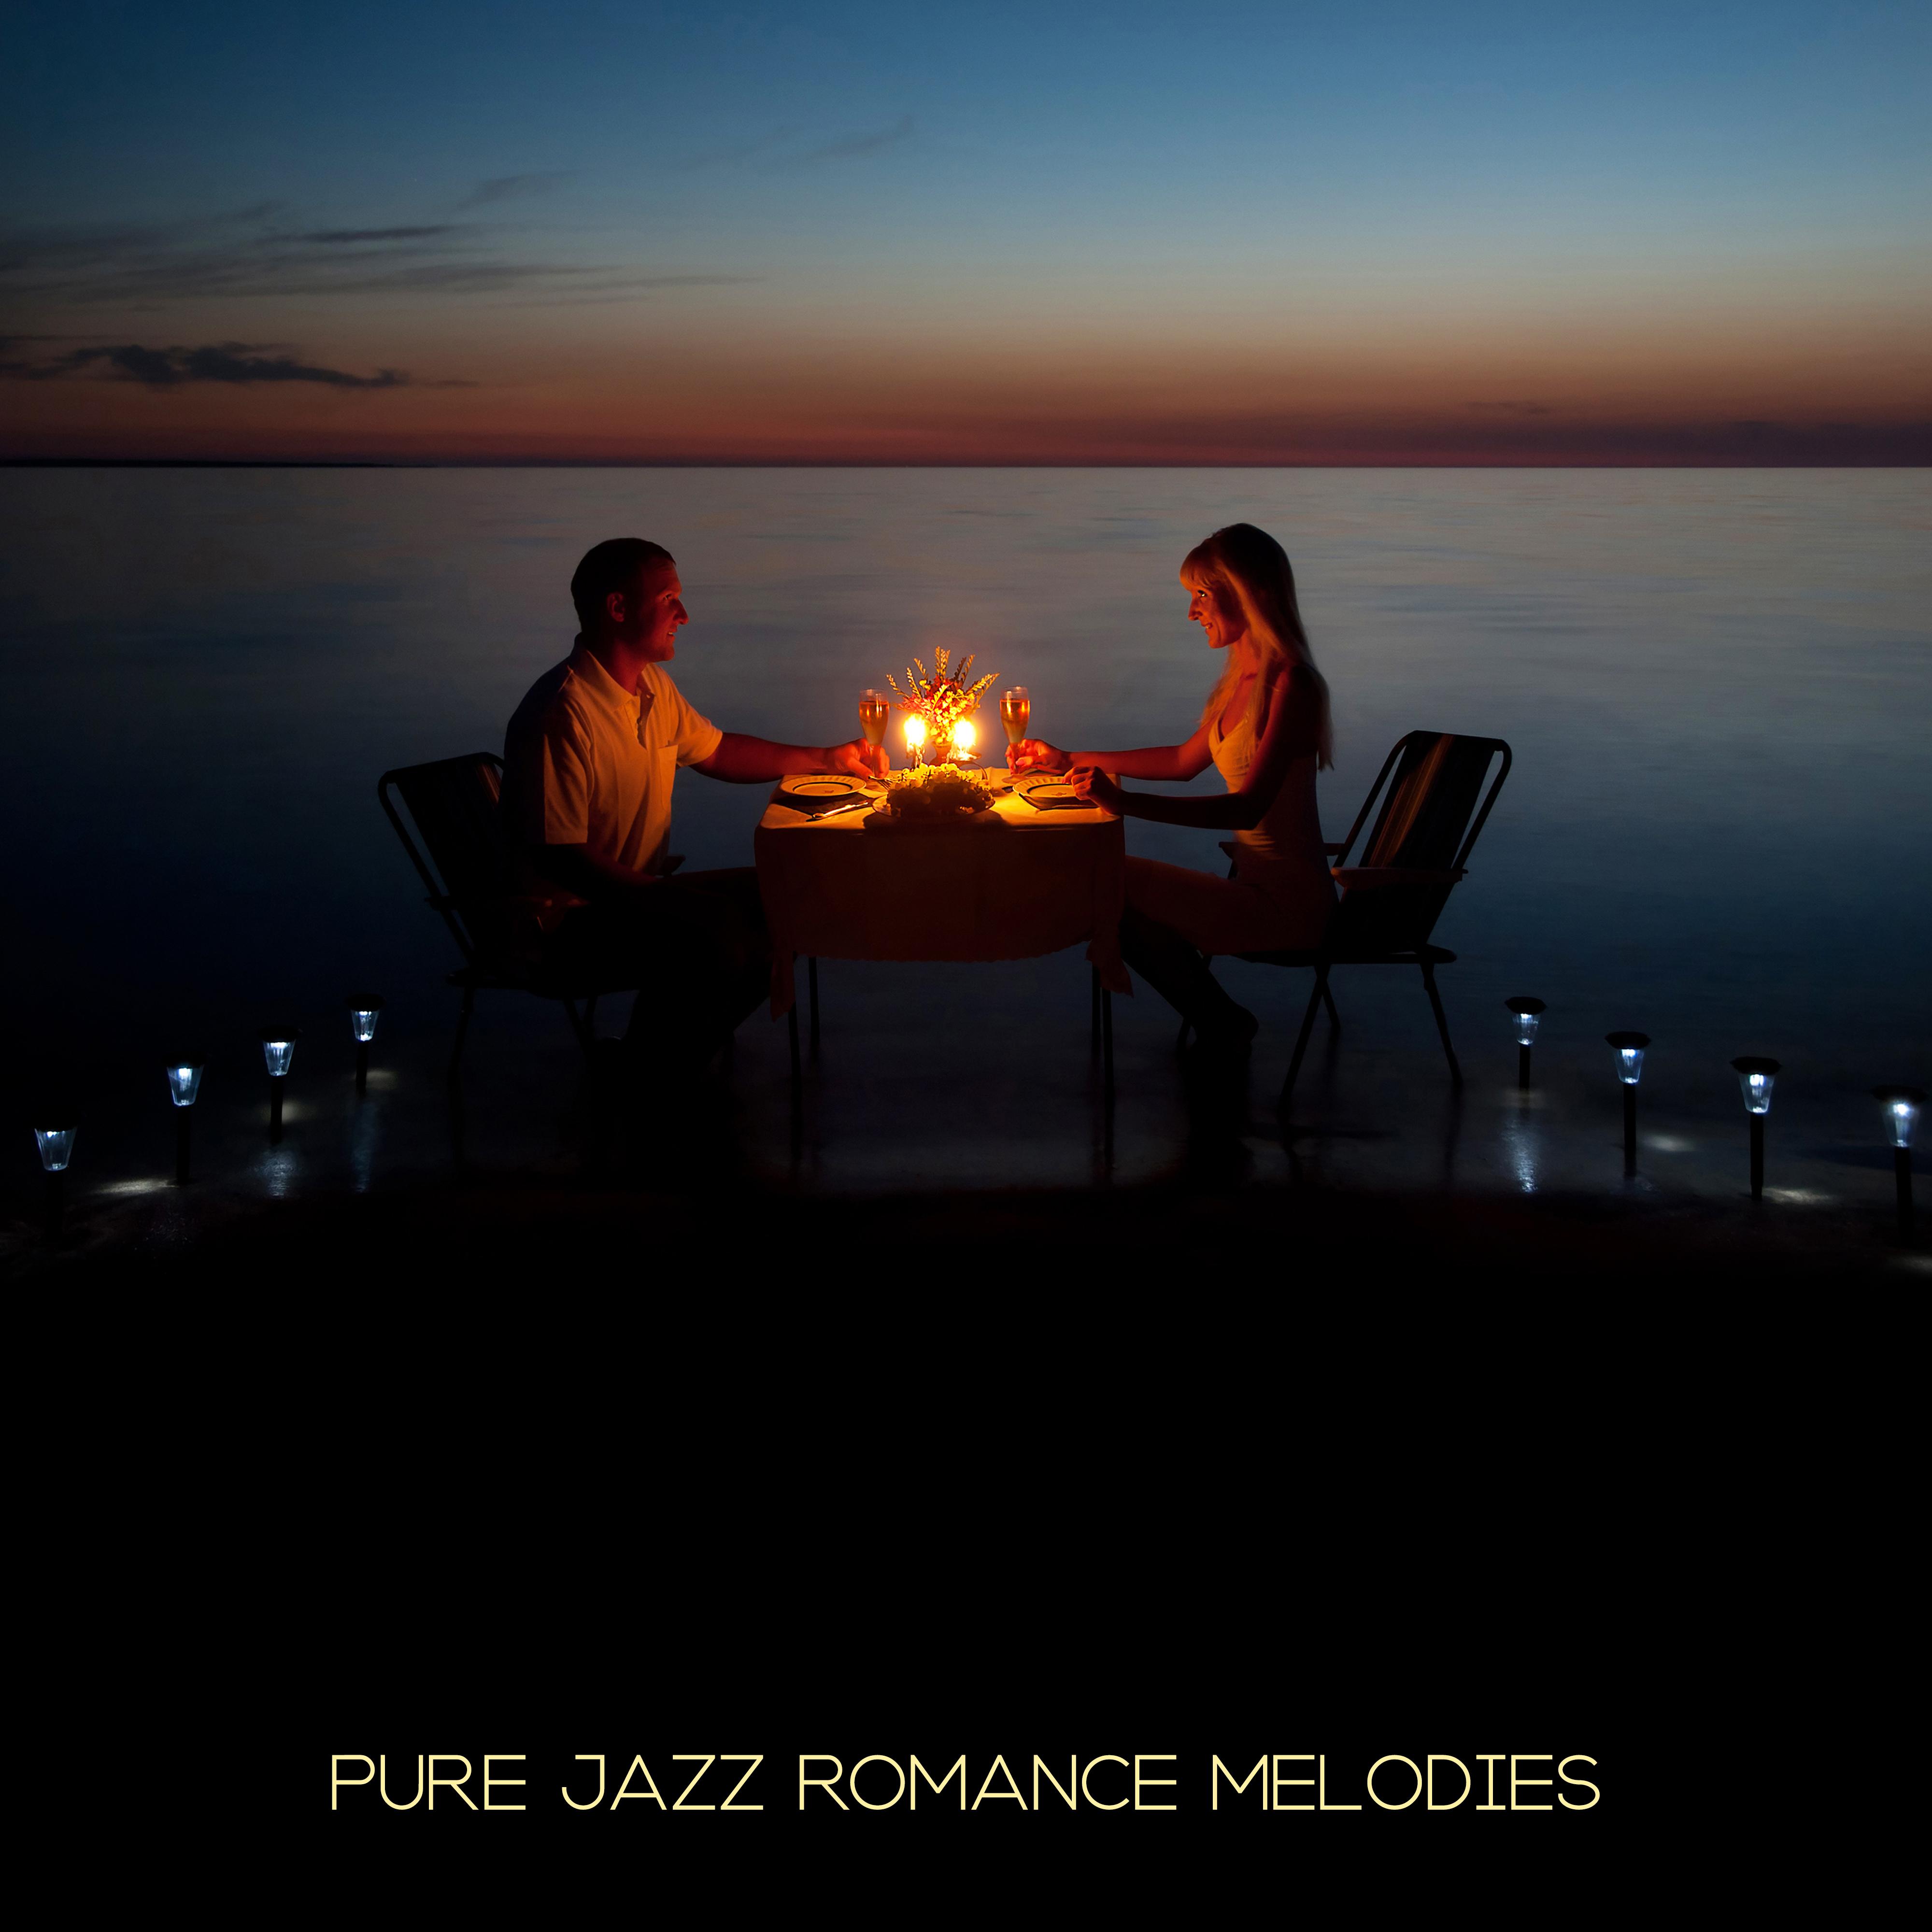 Pure Jazz Romance Melodies: 2019 Instrumental Piano Jazz with Sentimental Sounds for Couple's Date, Music for Wedding Anniversary, Music Full of Love